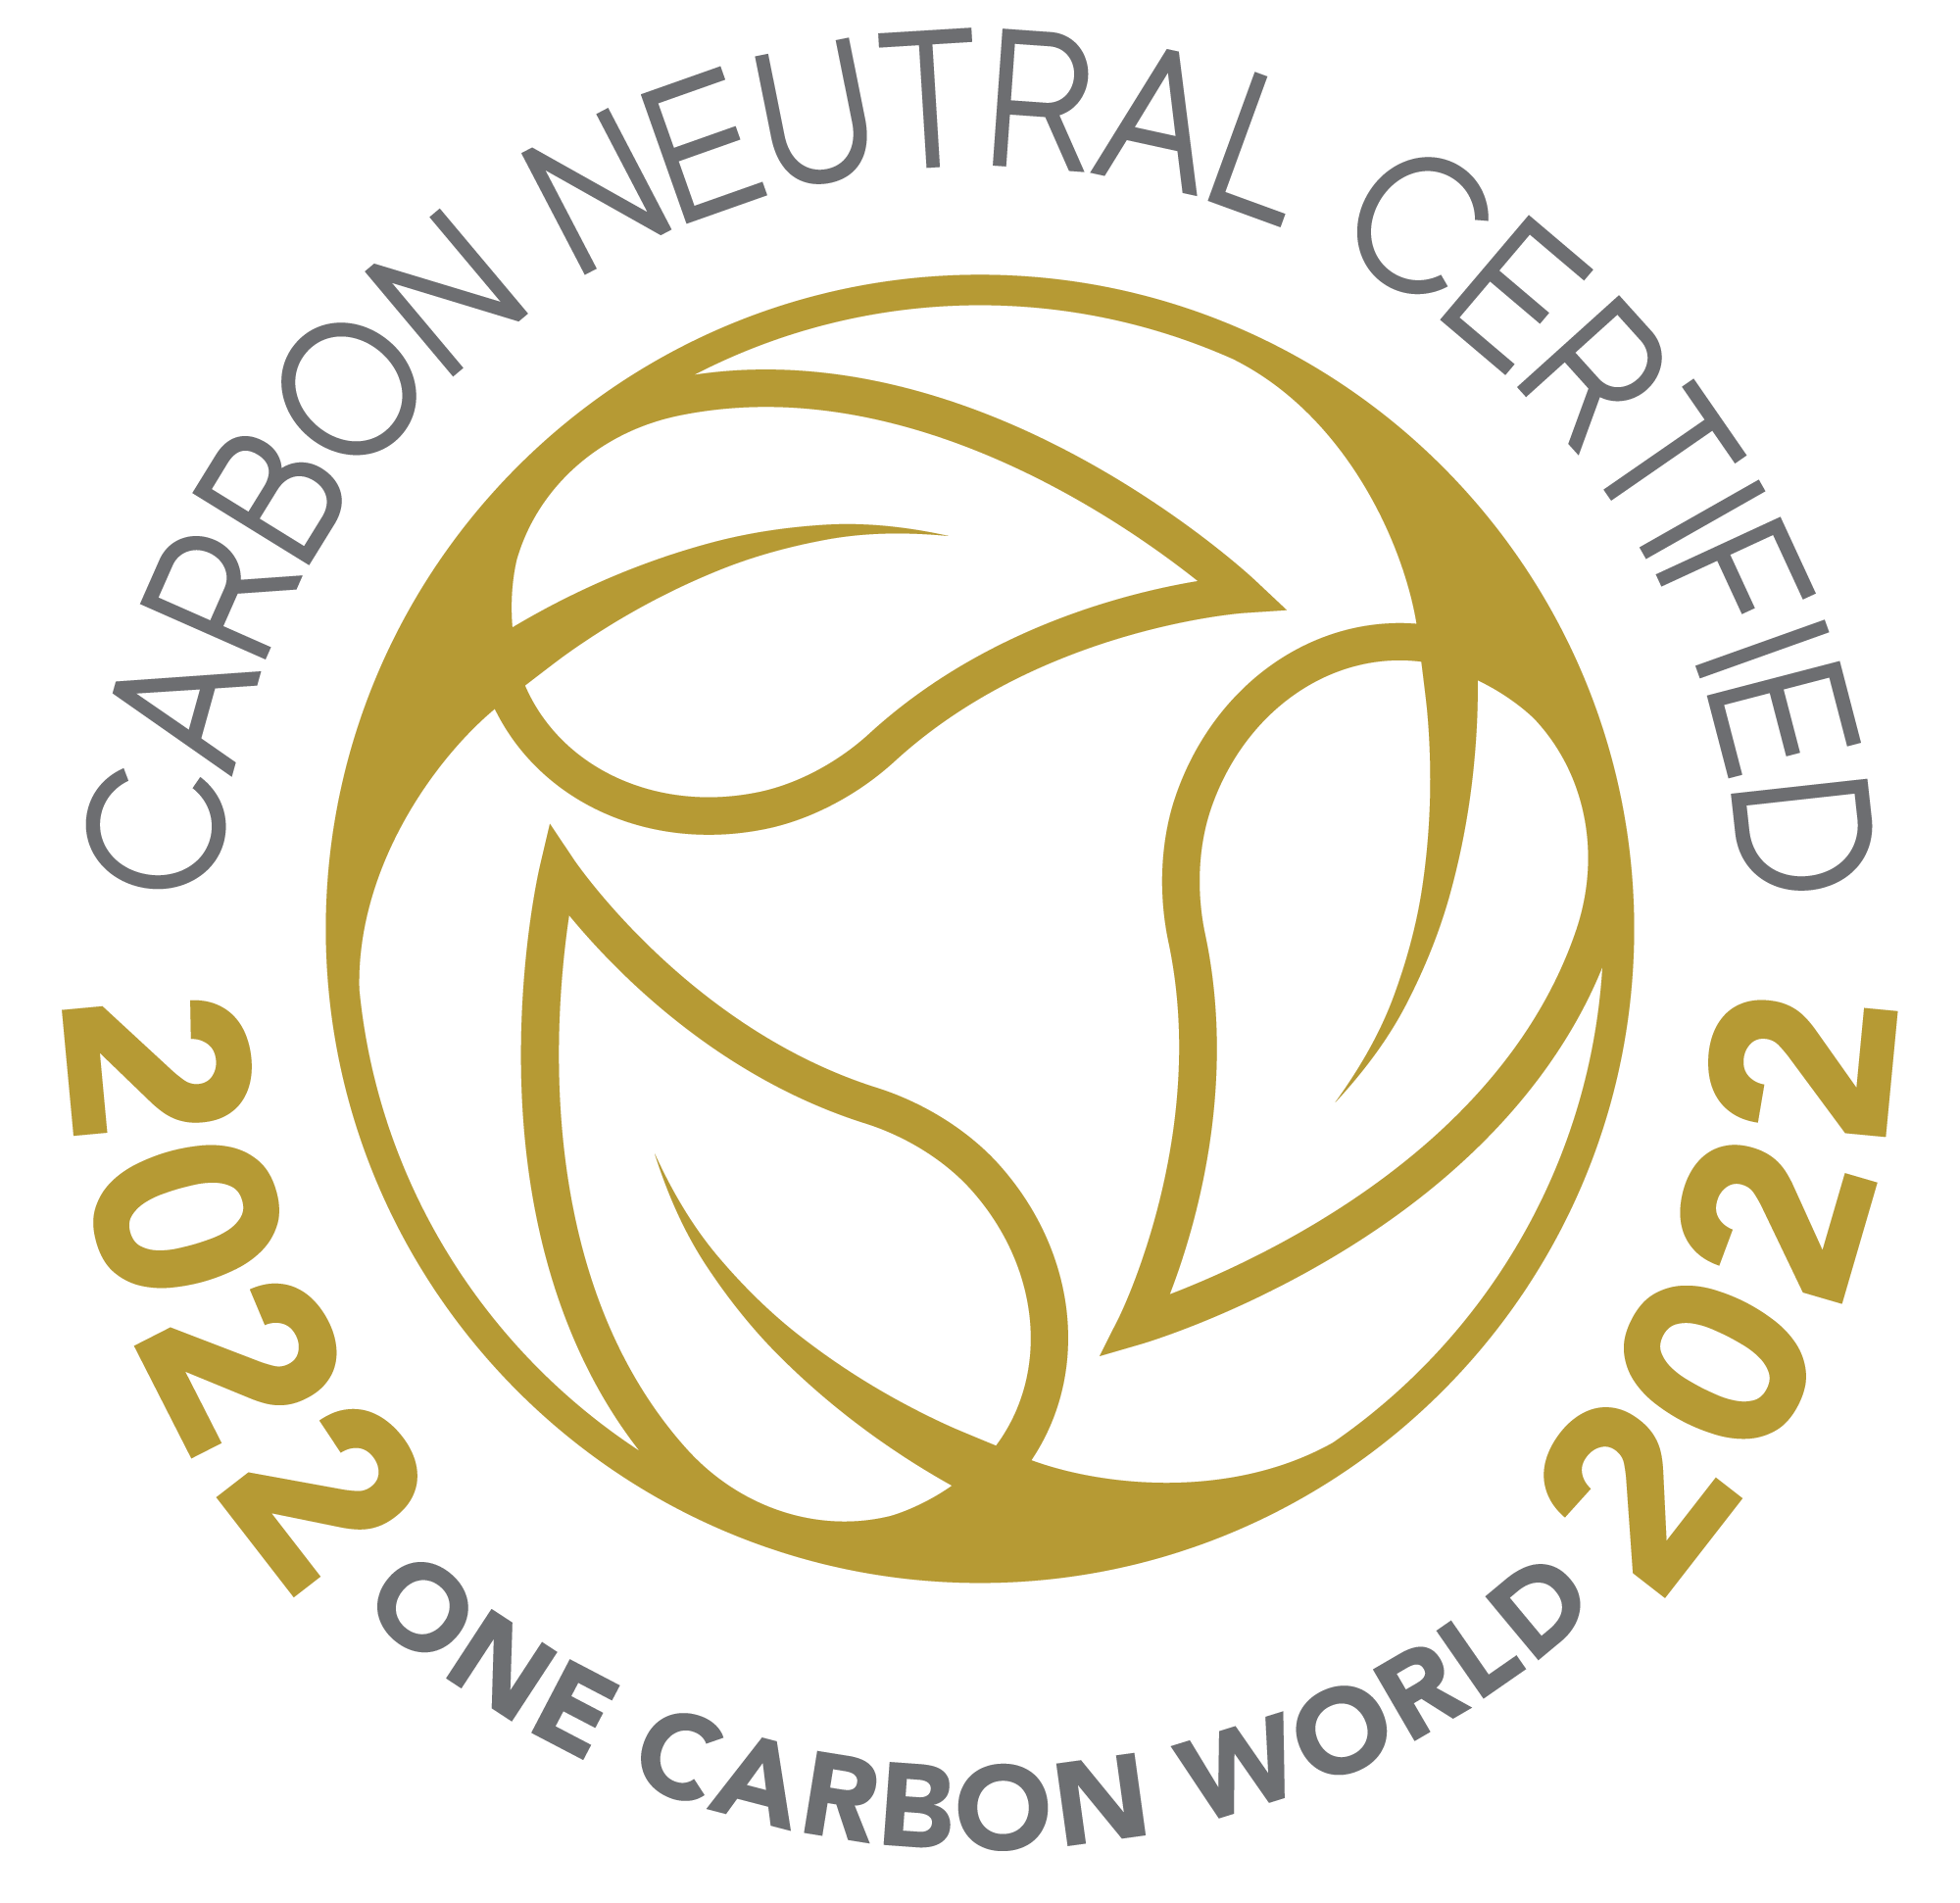 Carbon neutral certified 2022 logo